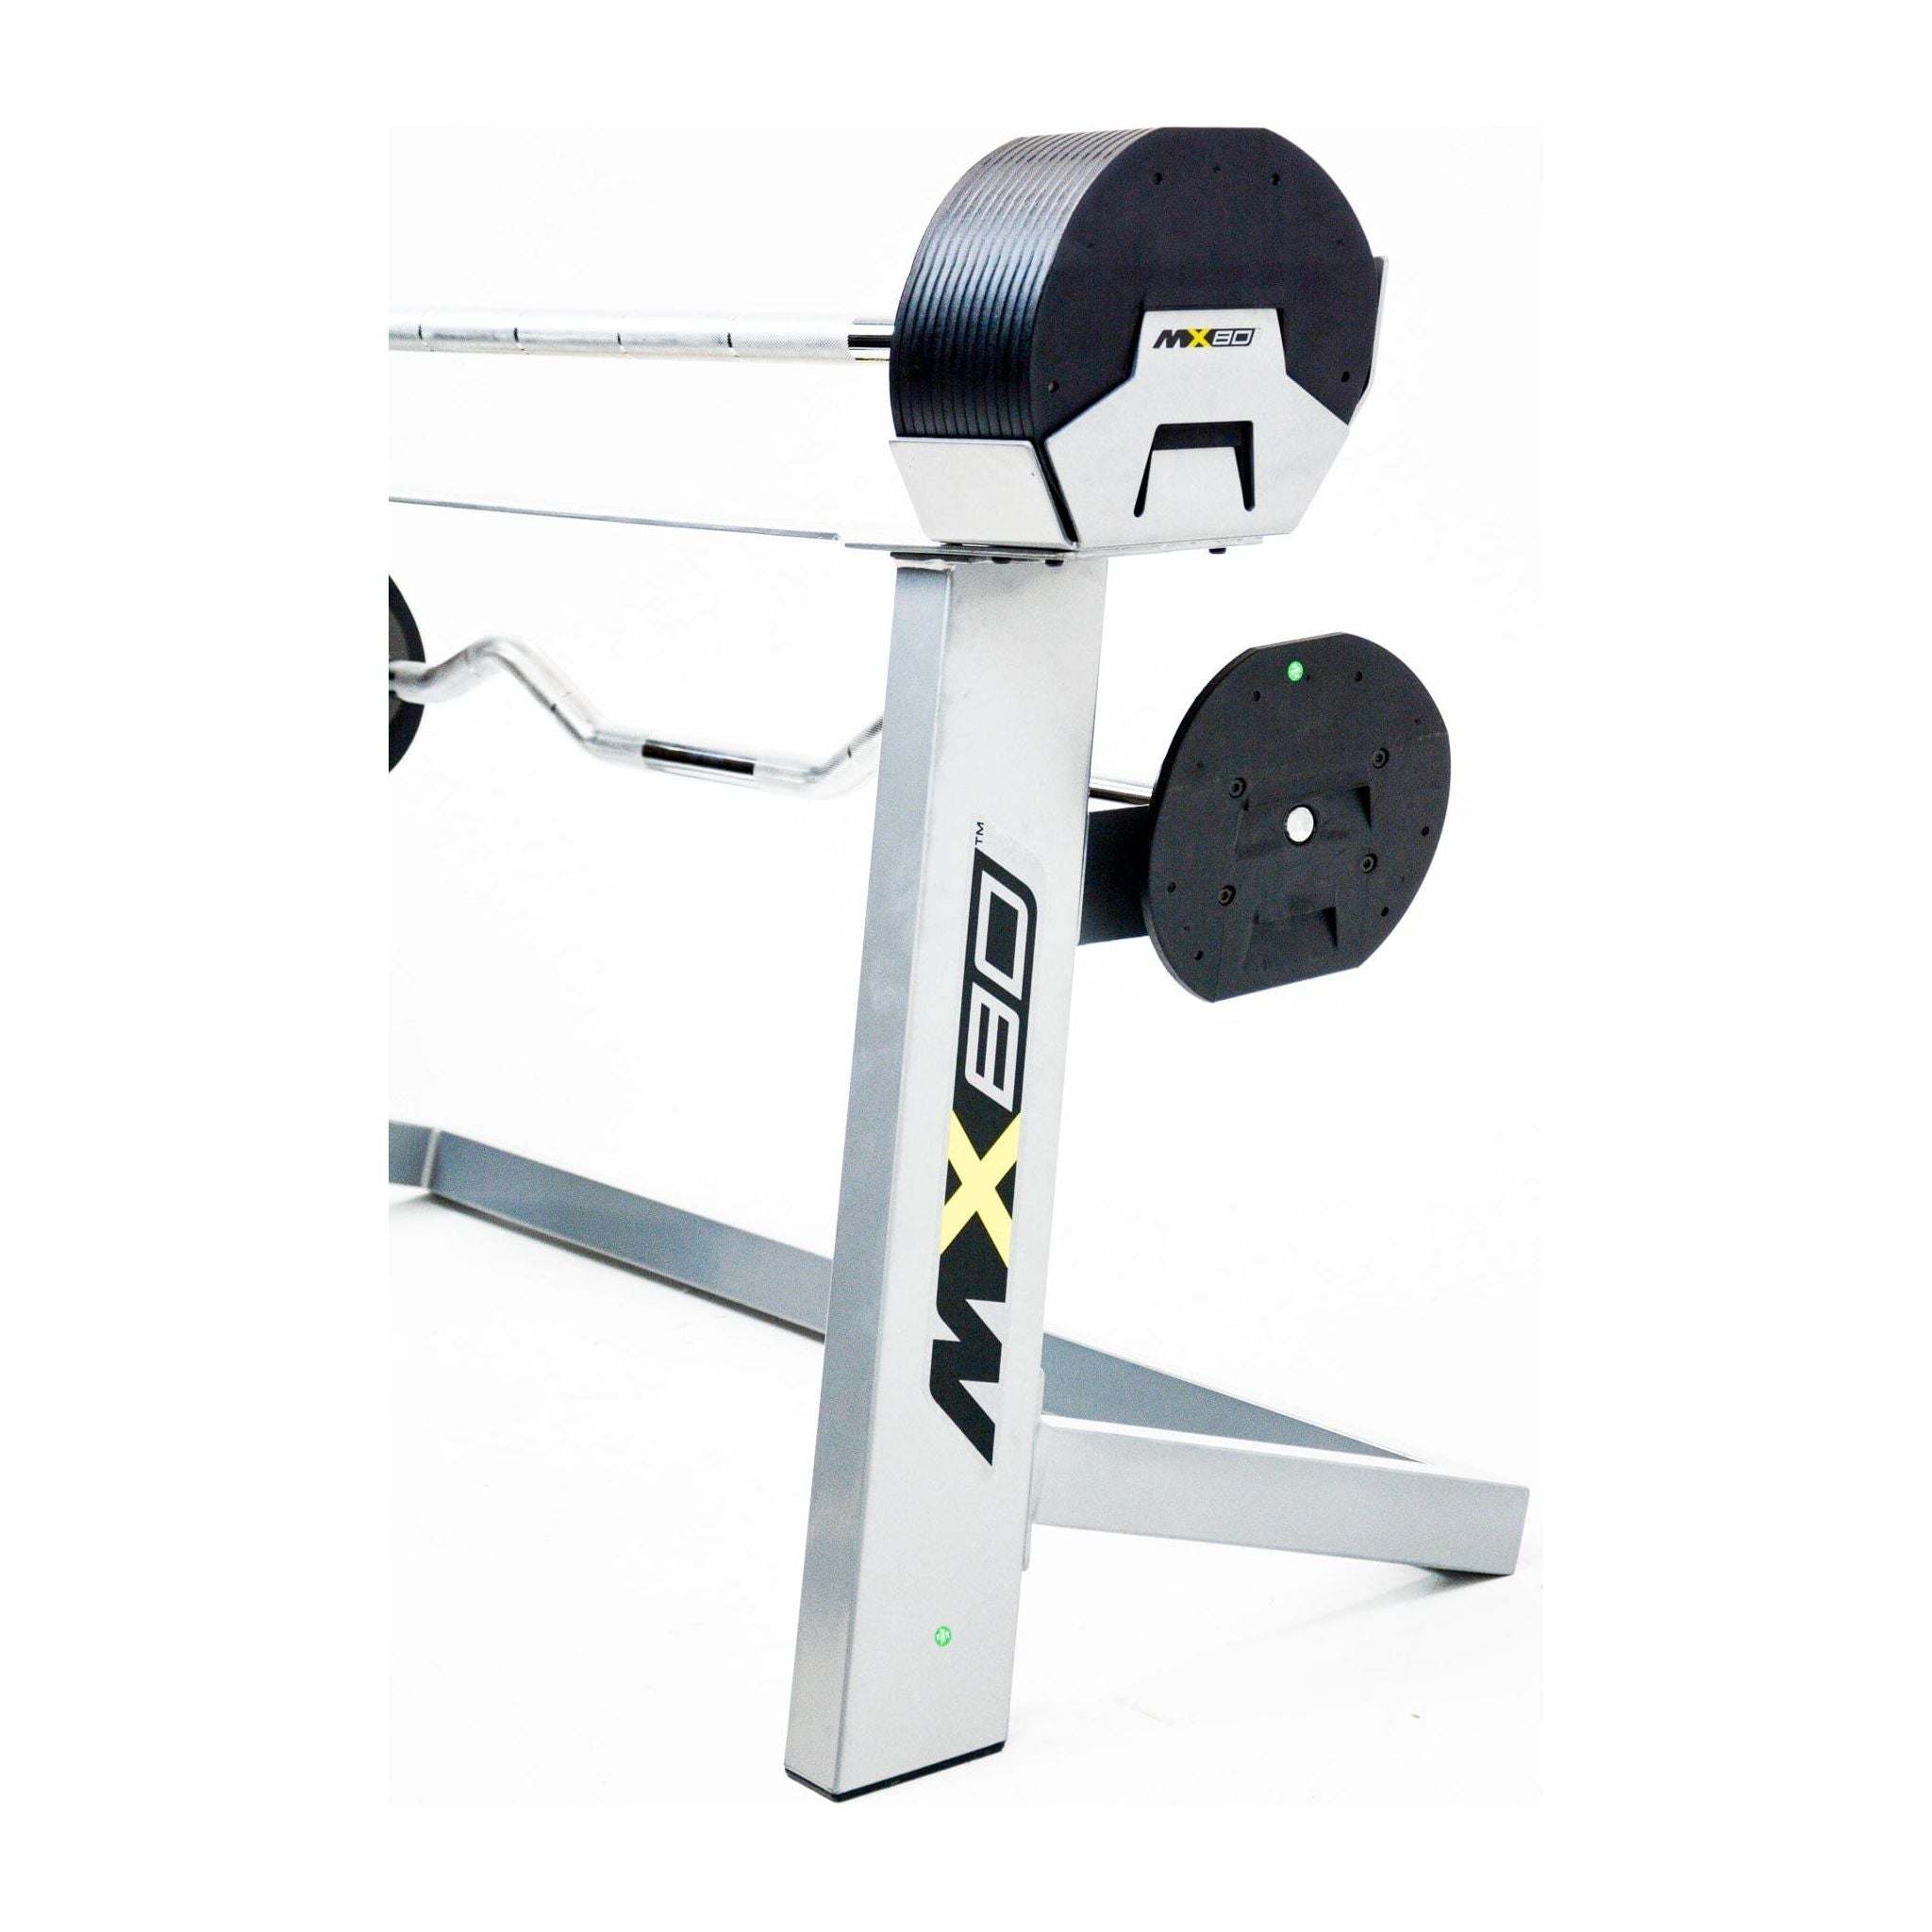 MX80 Rapid Change Adjustable Barbell / Curl Bar System (20 lbs to 80 lbs)